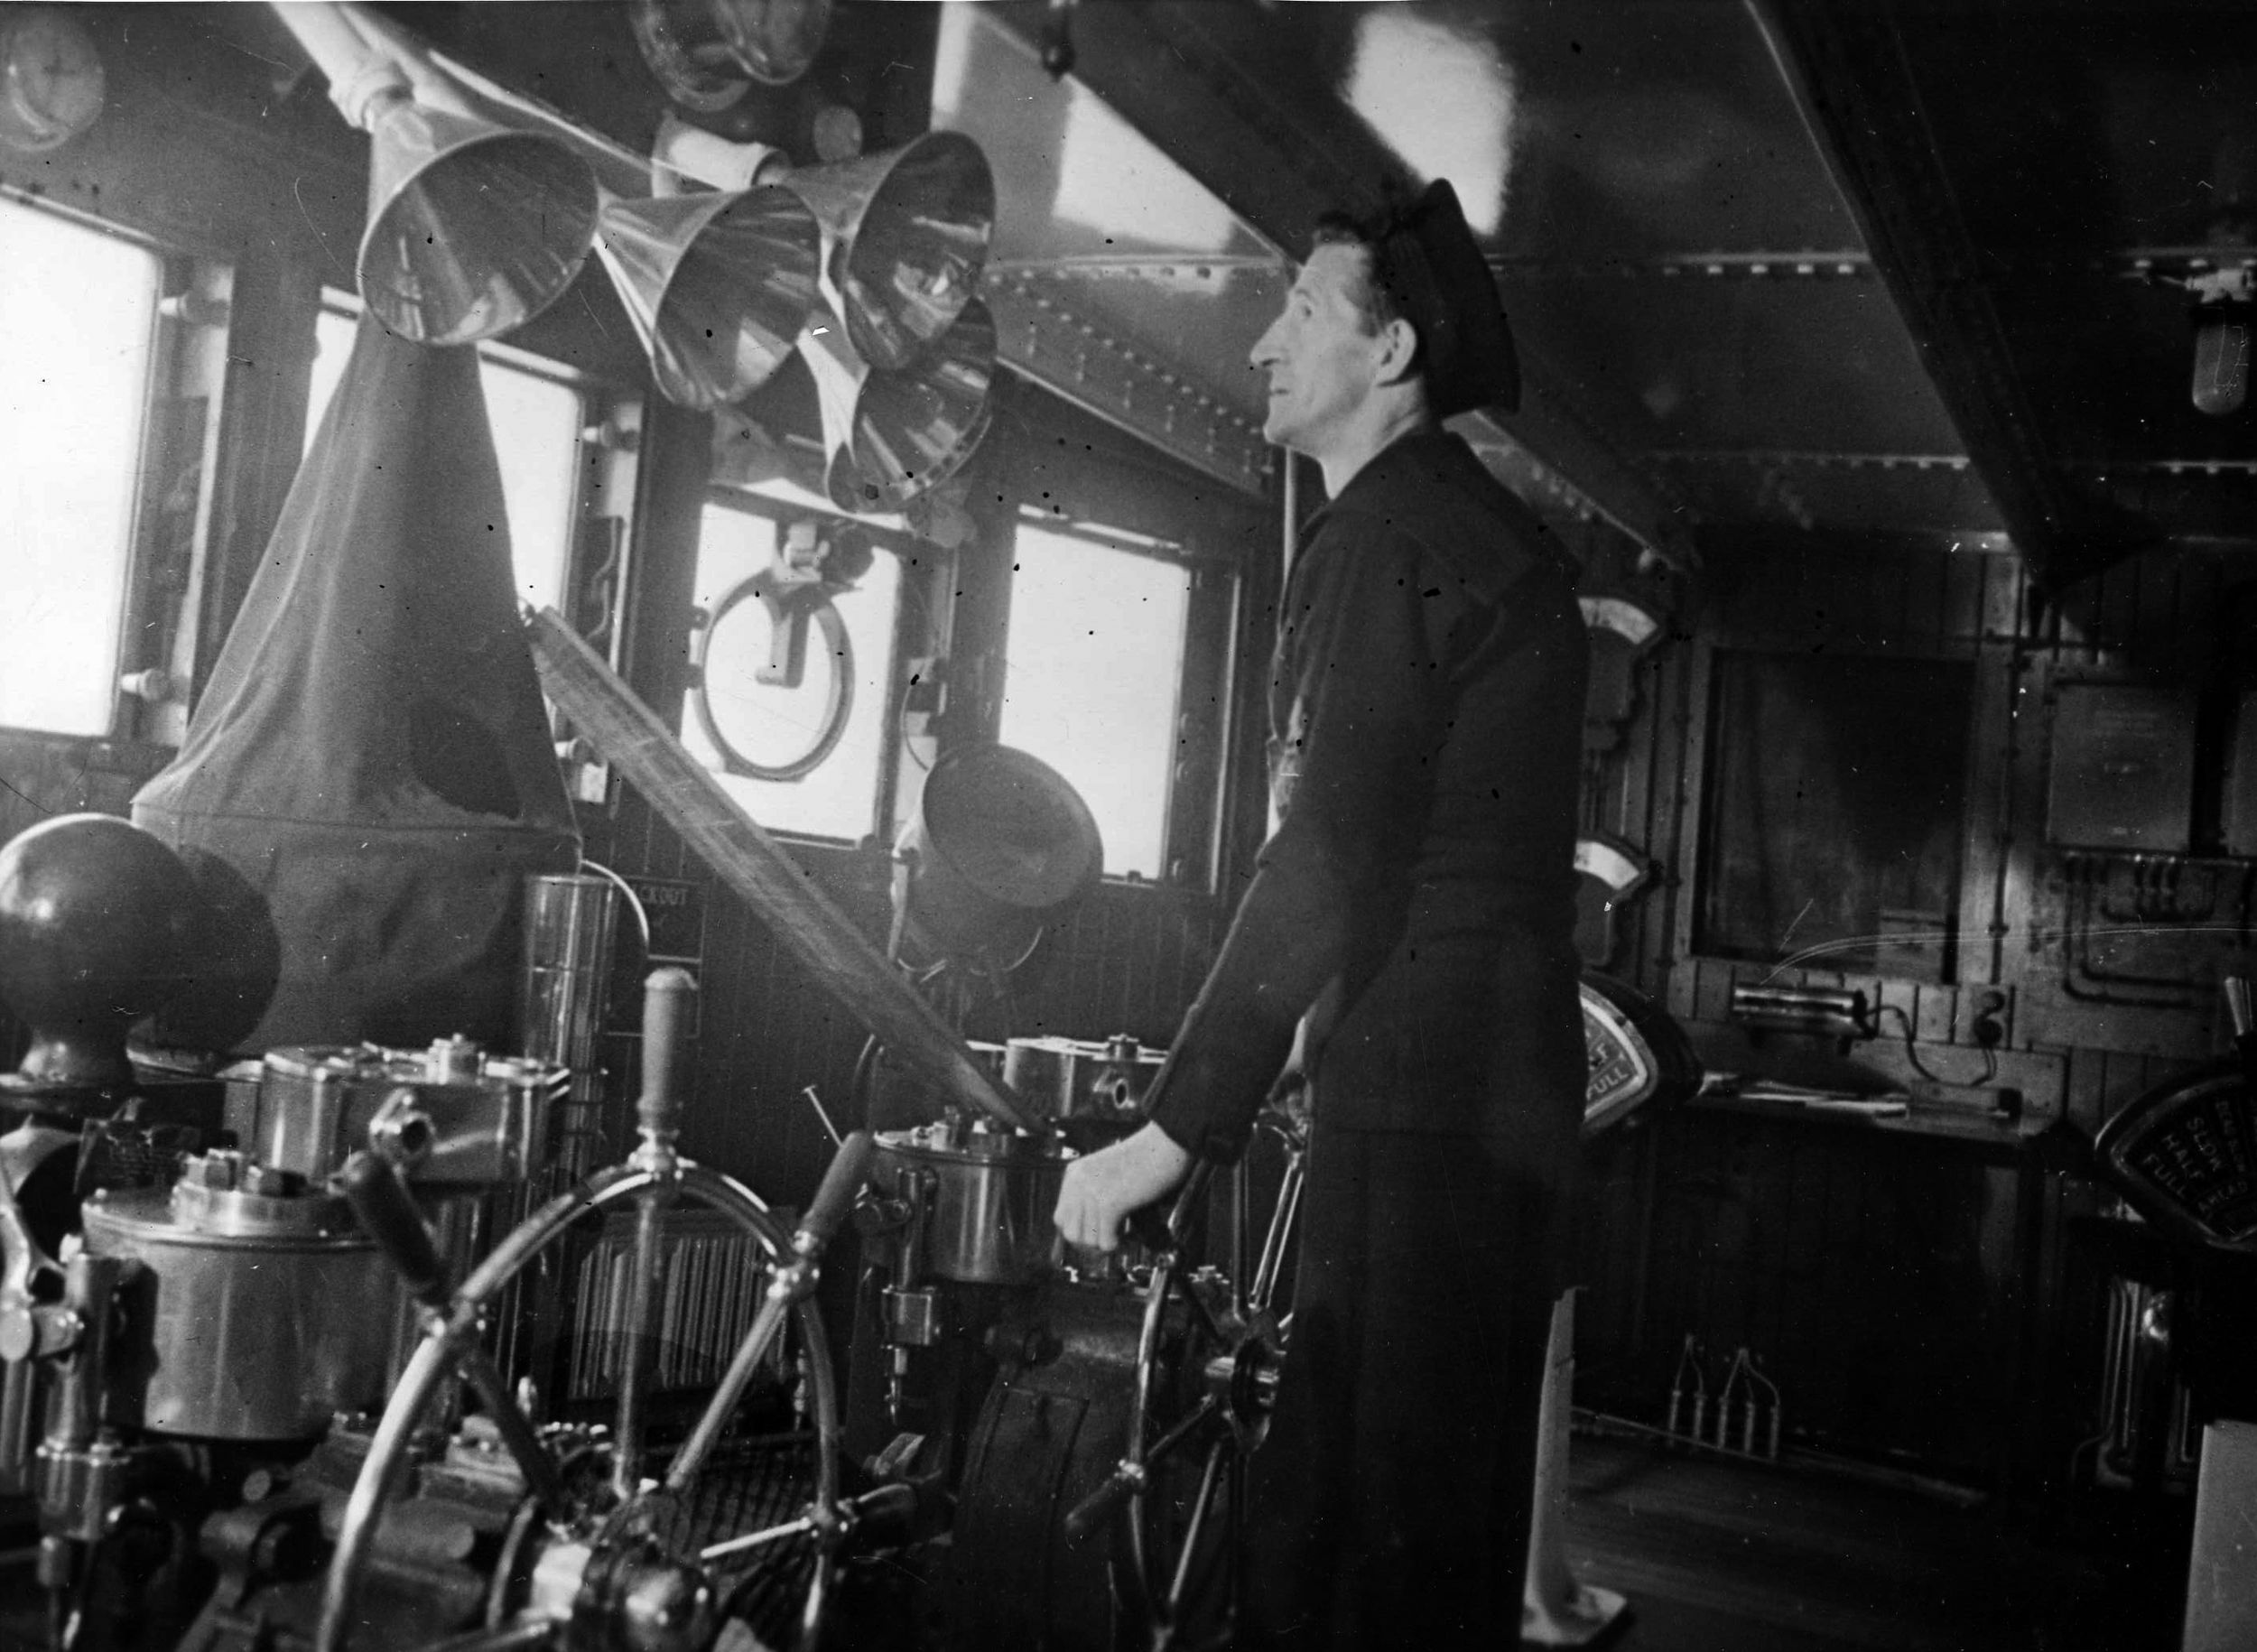 A veteran of the Queen Mary since her maiden voyage, Quartermaster William Hilton stands at one of the ship’s two wheels inside the large wheelhouse.